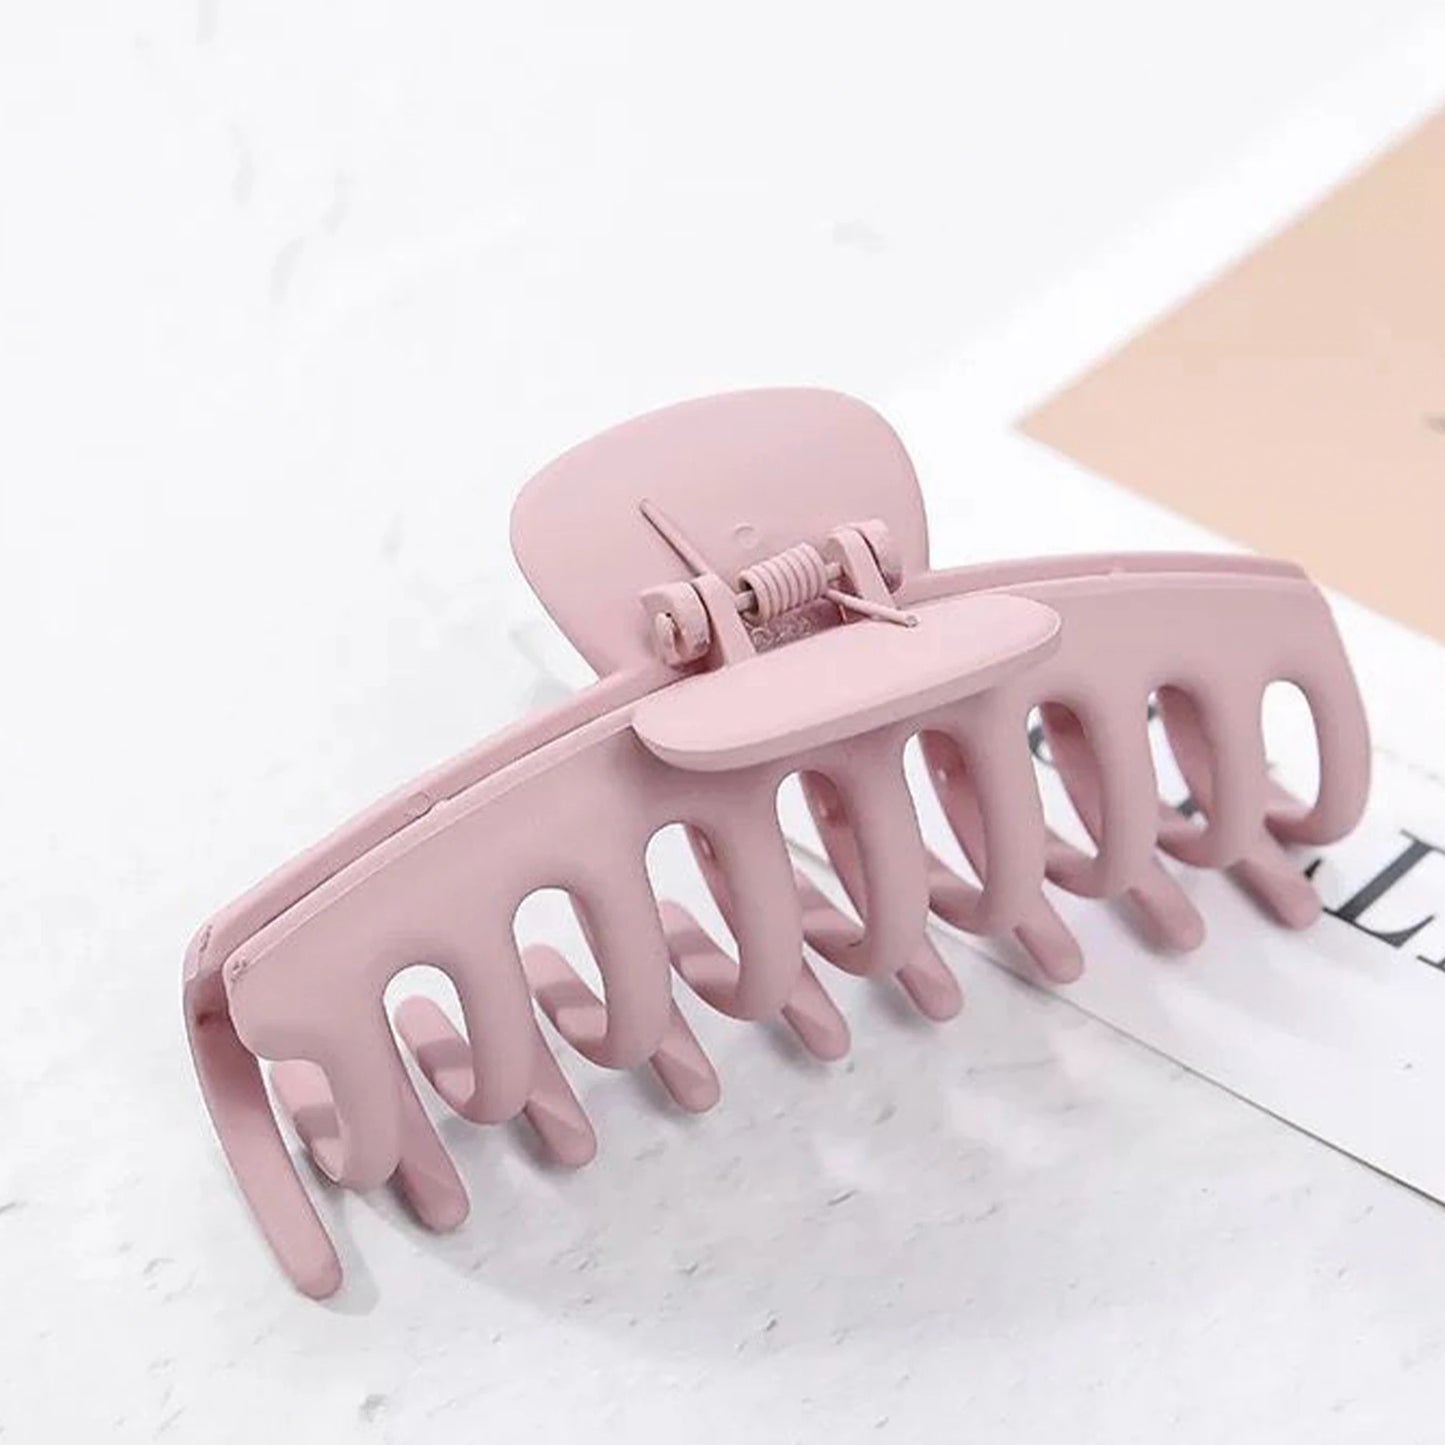 Stop looking for the perfect hair clip! Our large hair grips will hold up your hair while adding a little fashion flare to your wardrobe.